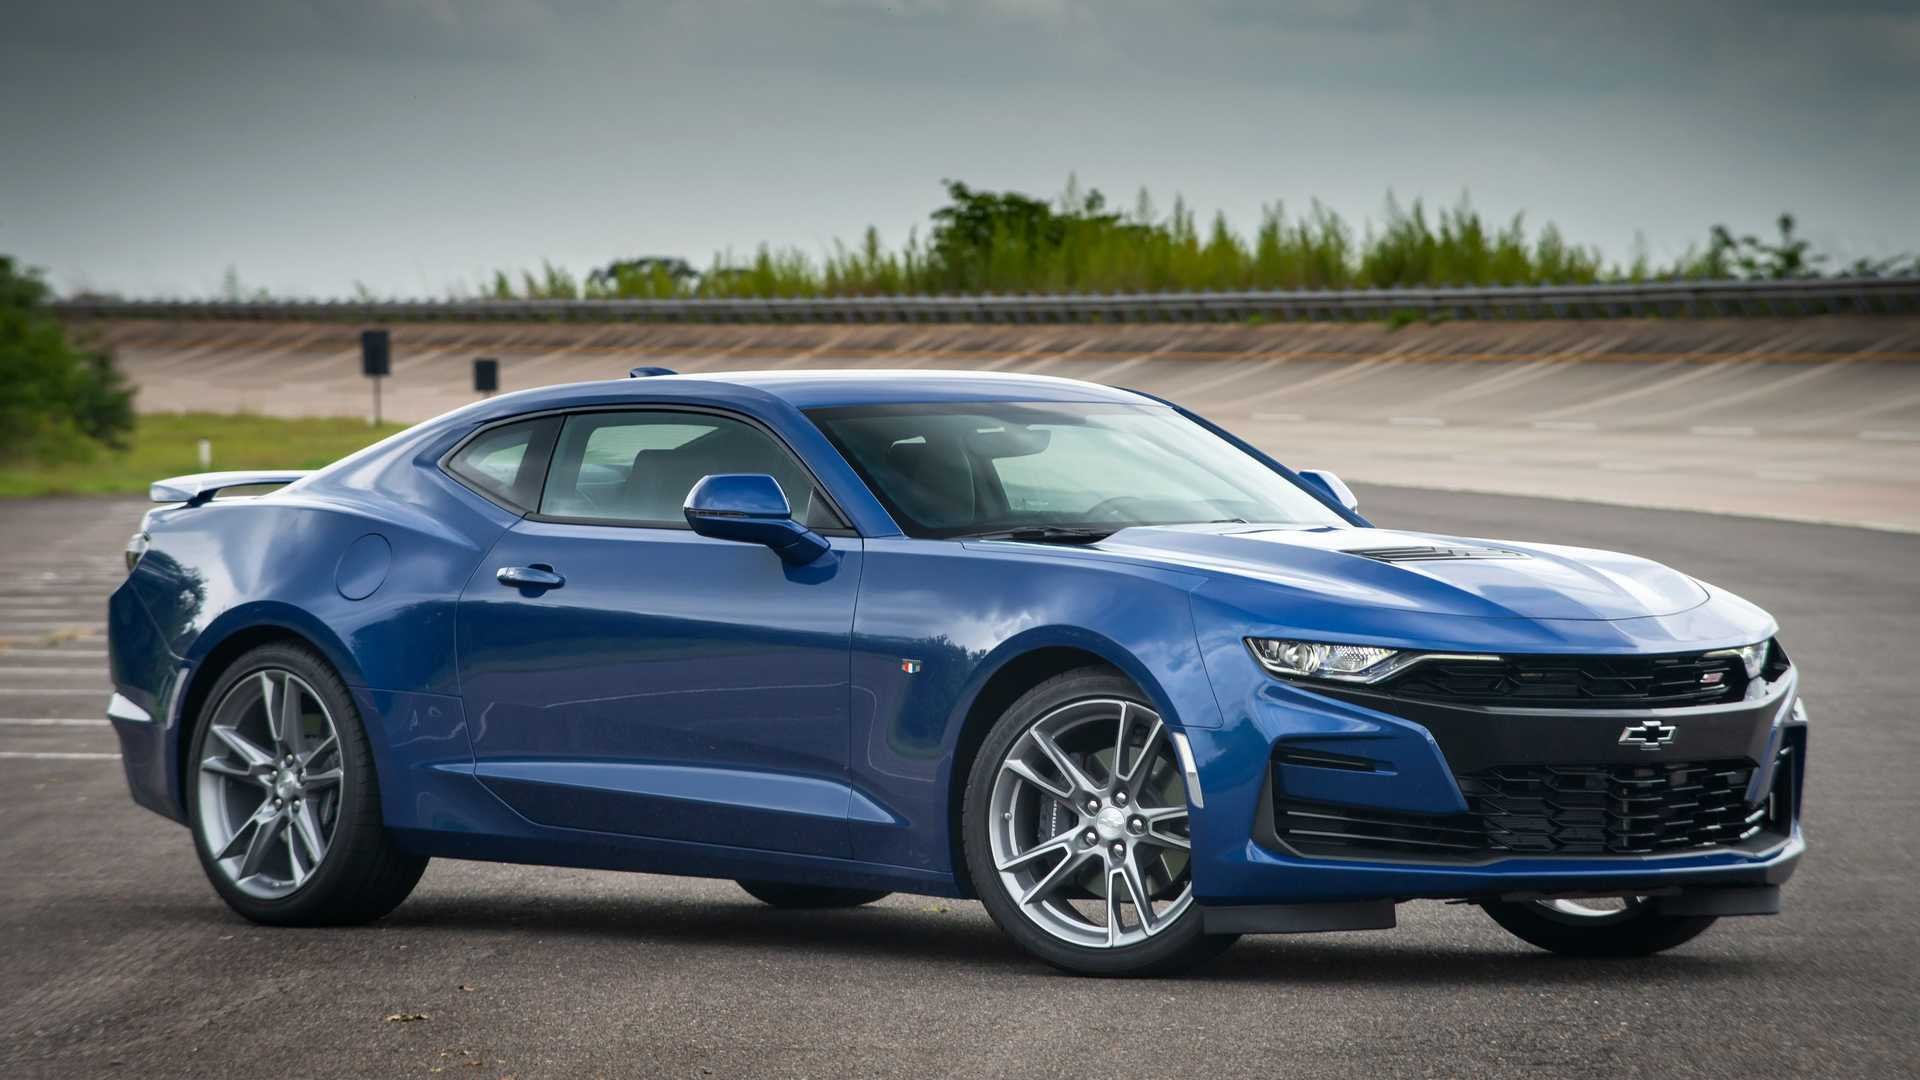 Crazy Chevy Camaro Lease Deals Have V8 Cheaper Than Four-Cylinder 1LT